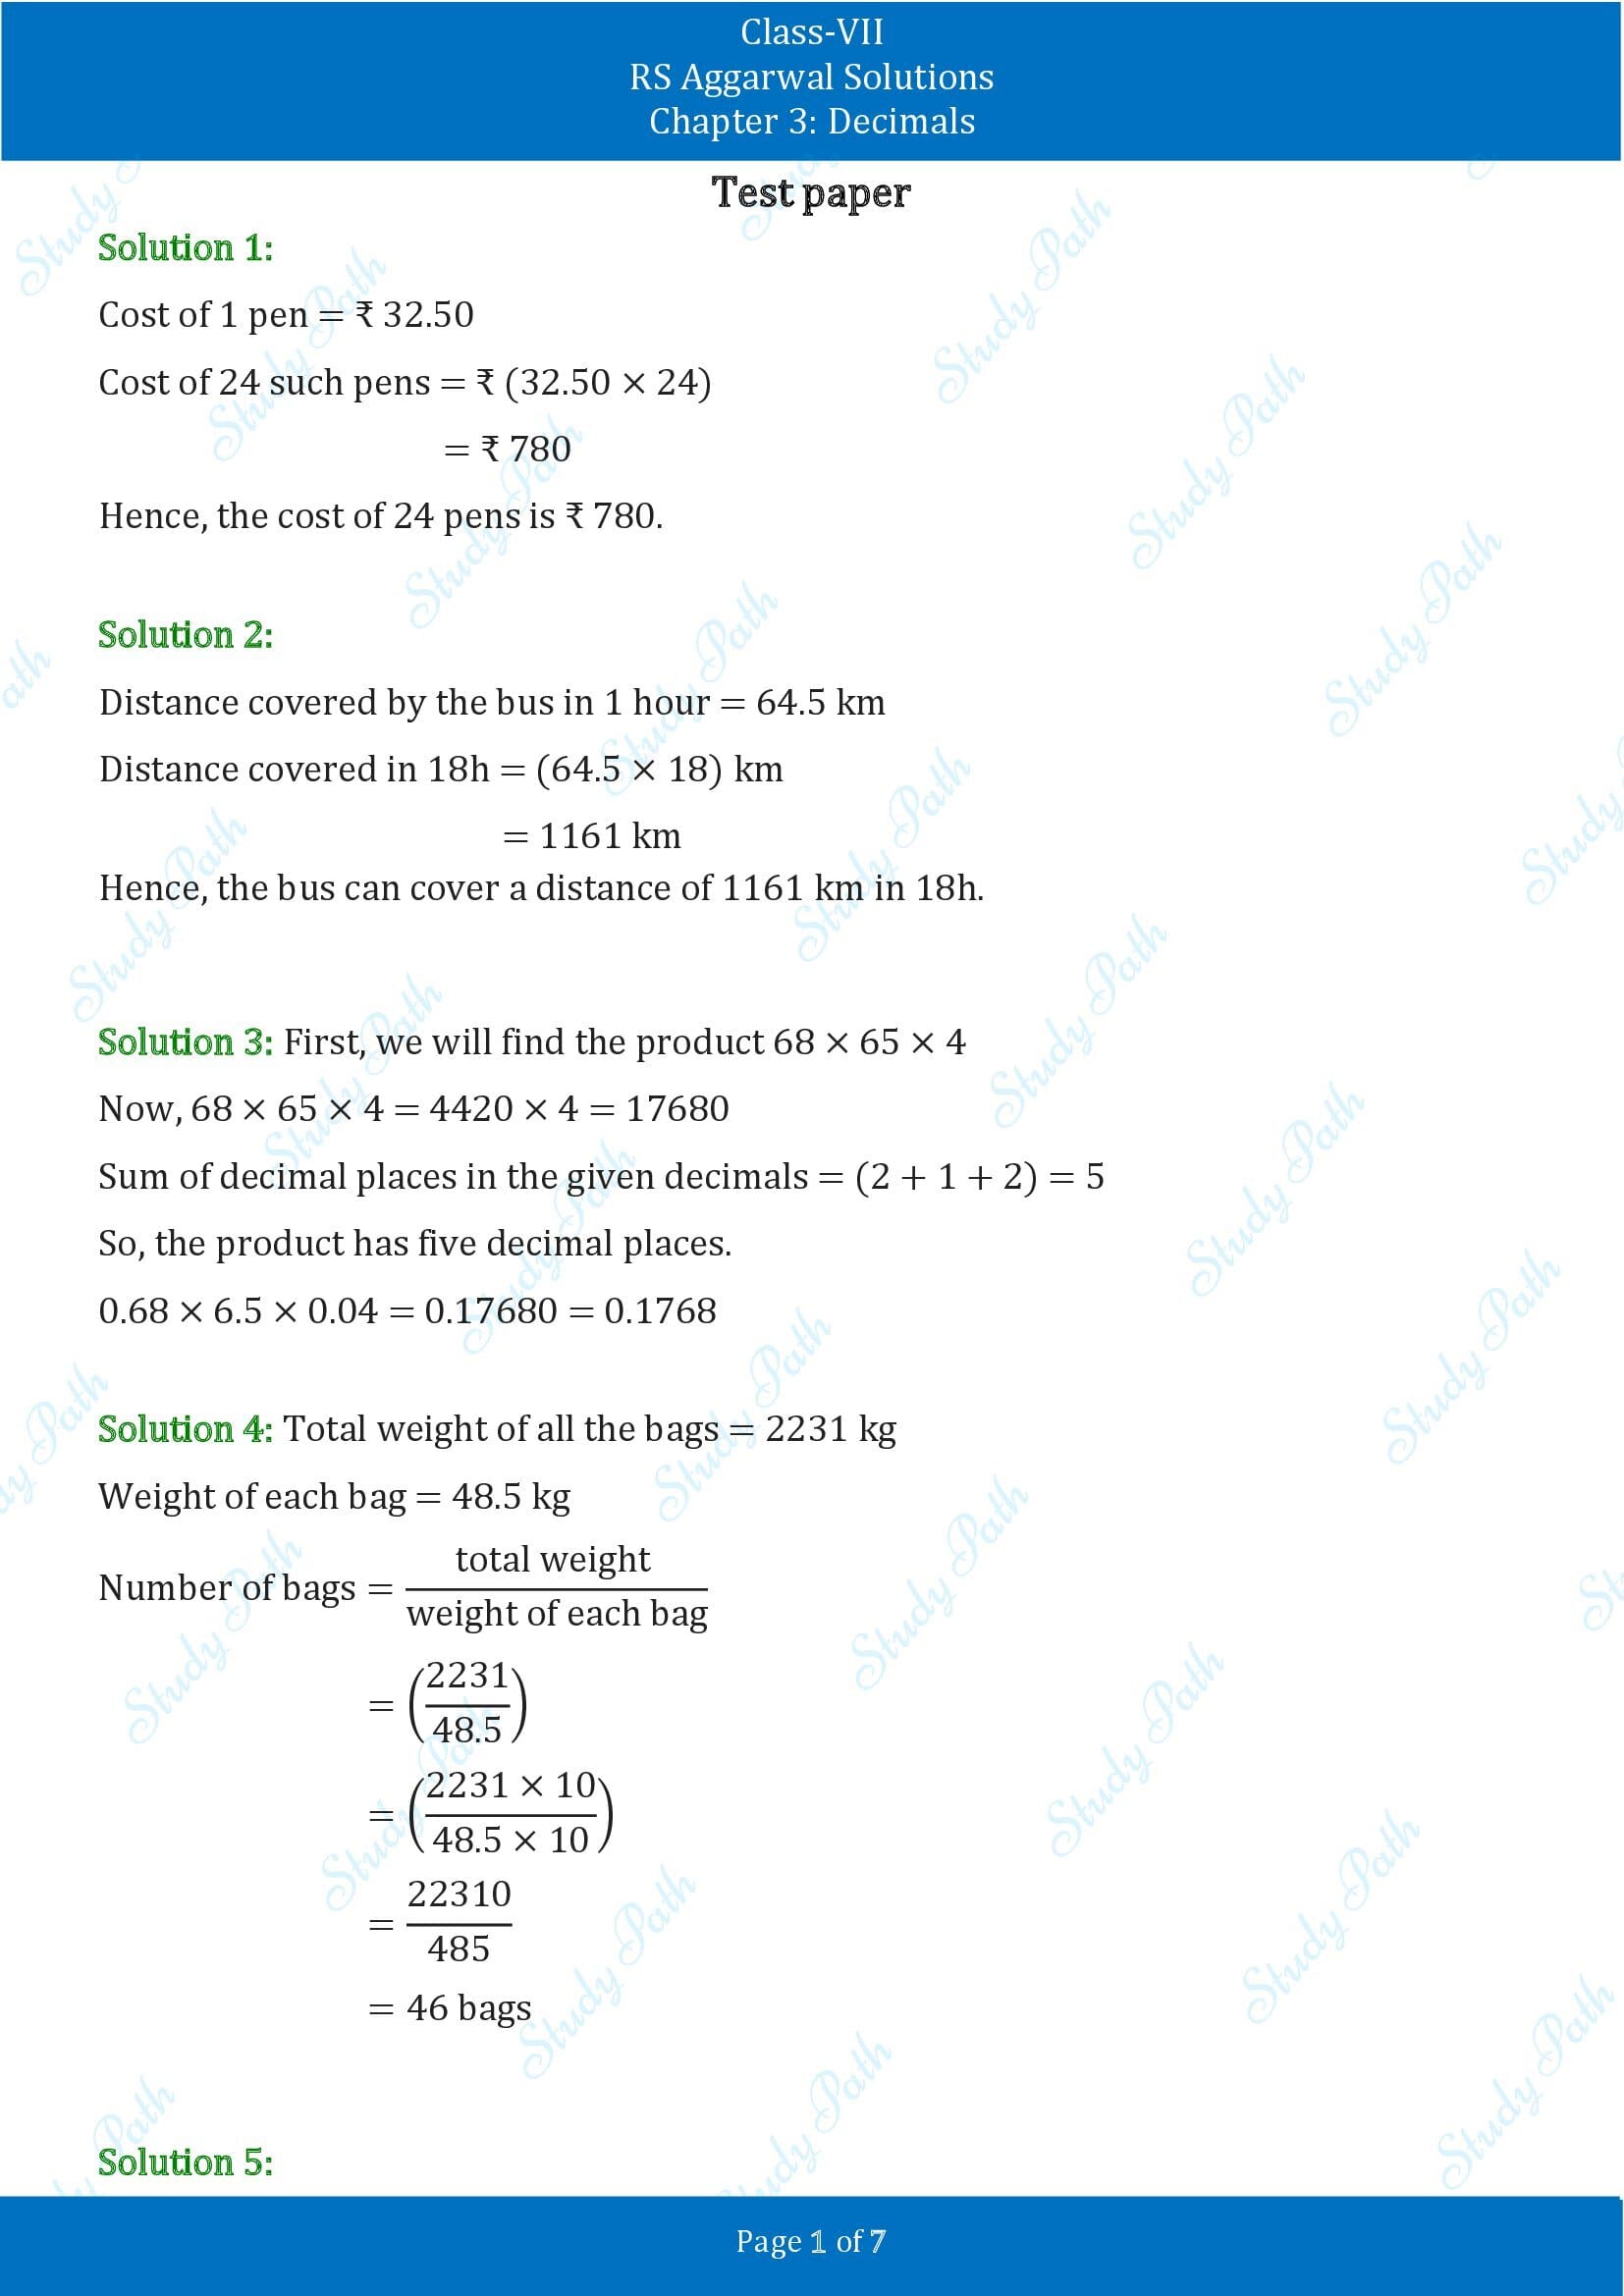 RS Aggarwal Solutions Class 7 Chapter 3 Decimals Test Paper 00001